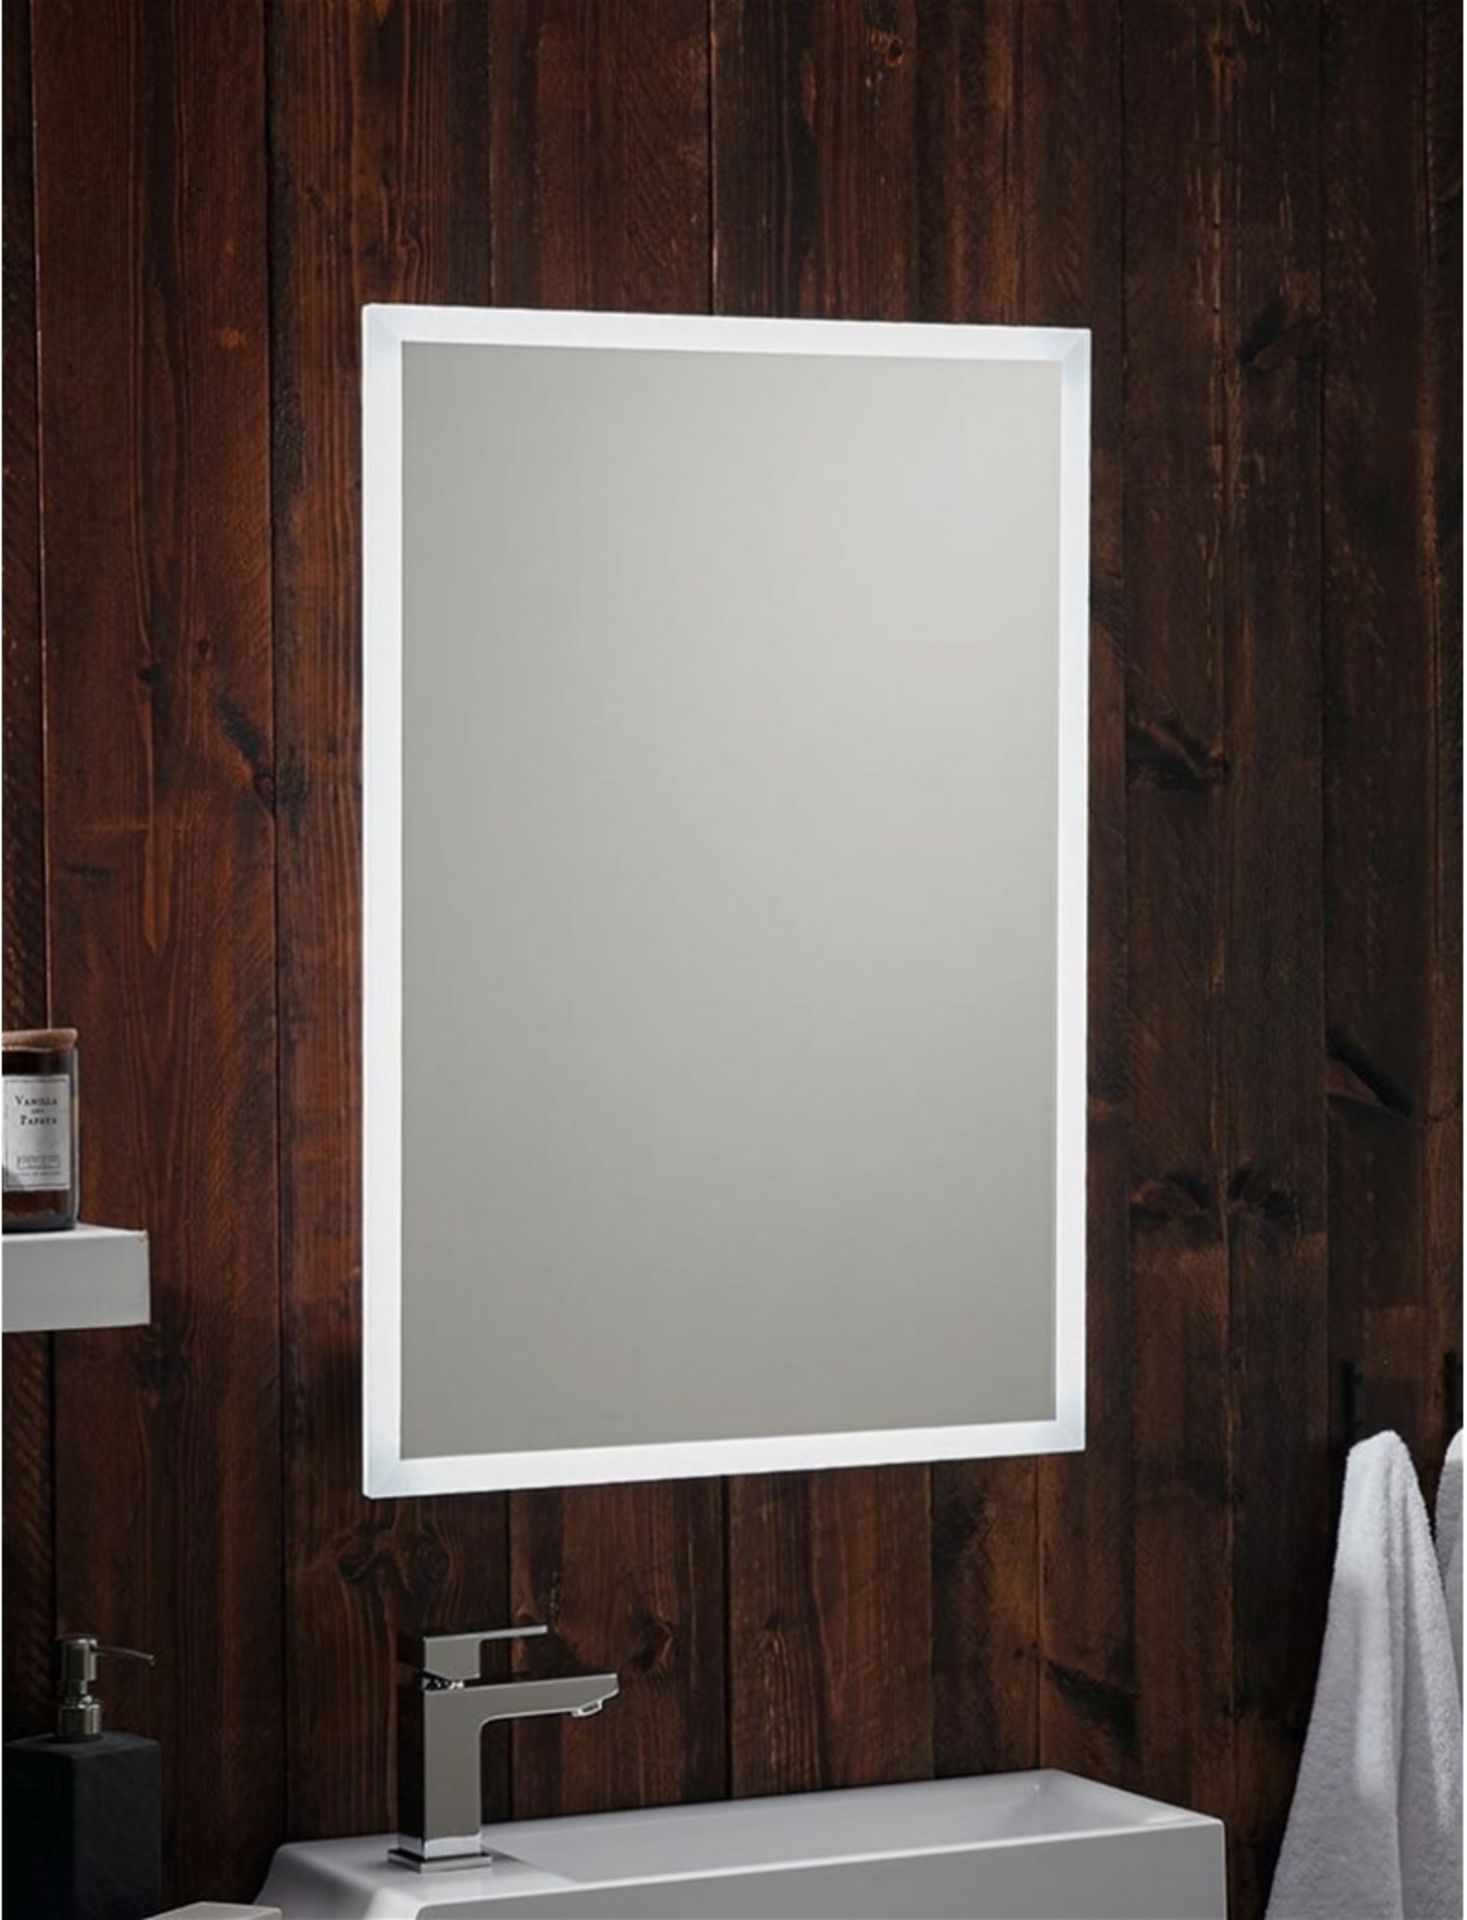 New (U10) Mosca Led Mirror With Demister Pad And Shaver Socket And Bluetooth 500 x 700mm. Rrp ?...